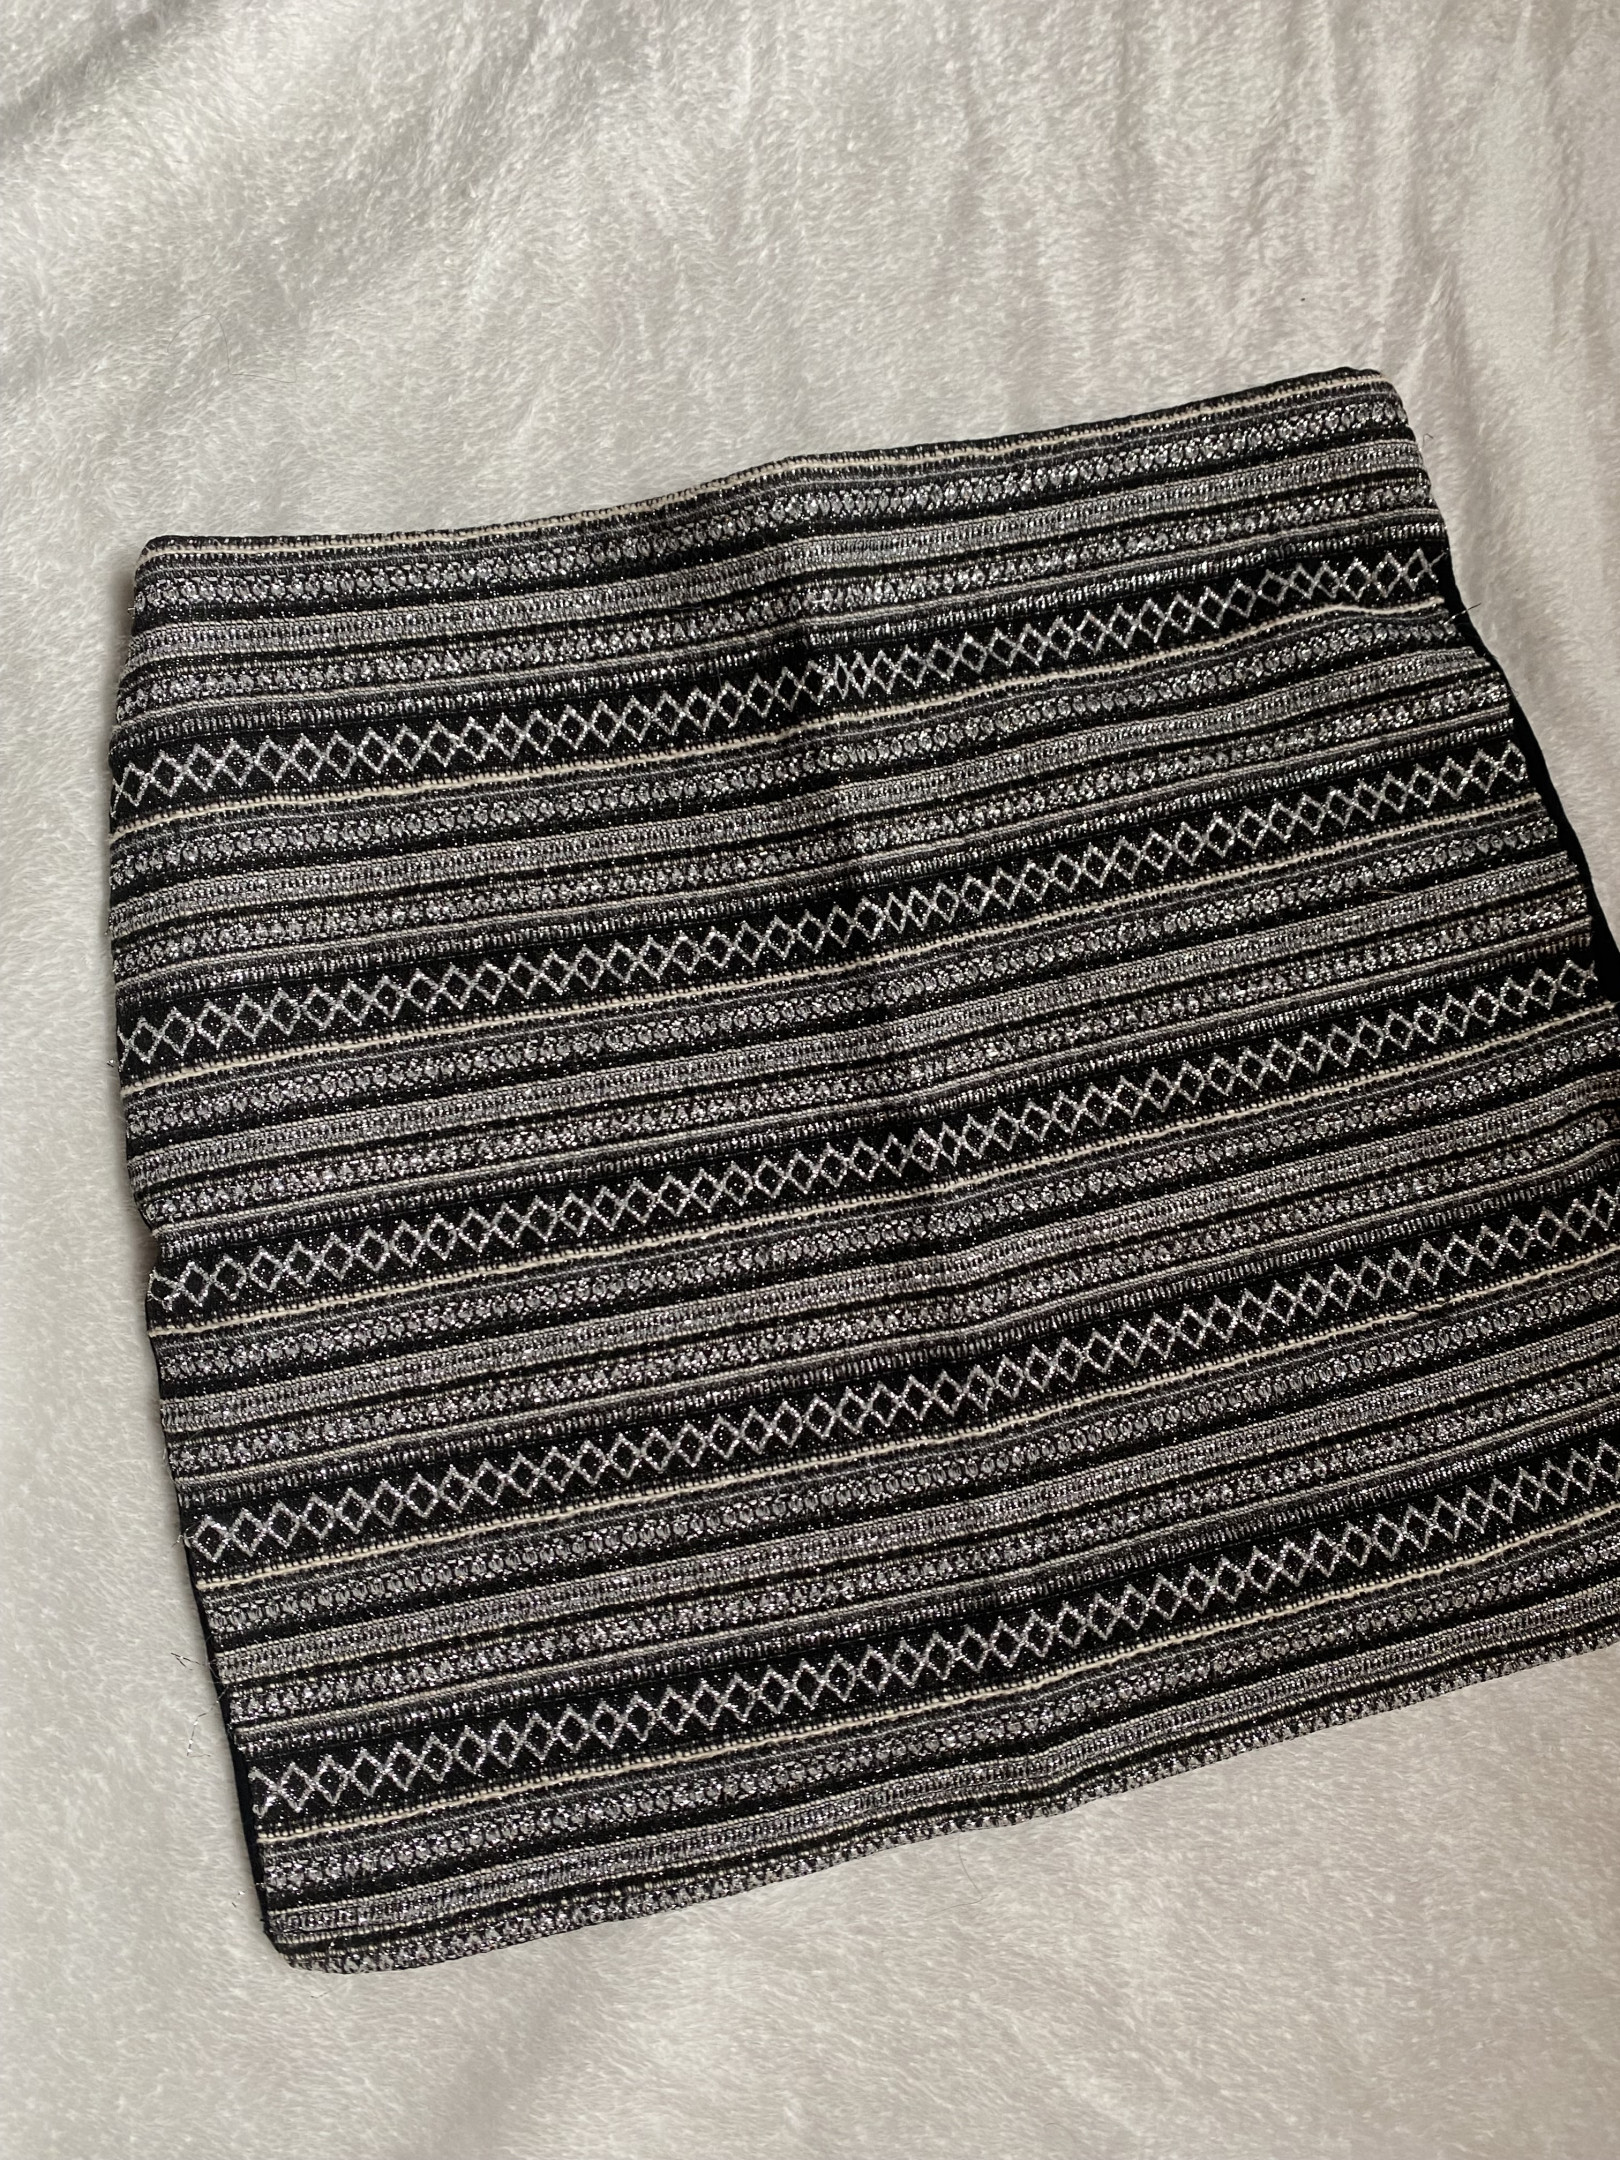 Black and silver skirt